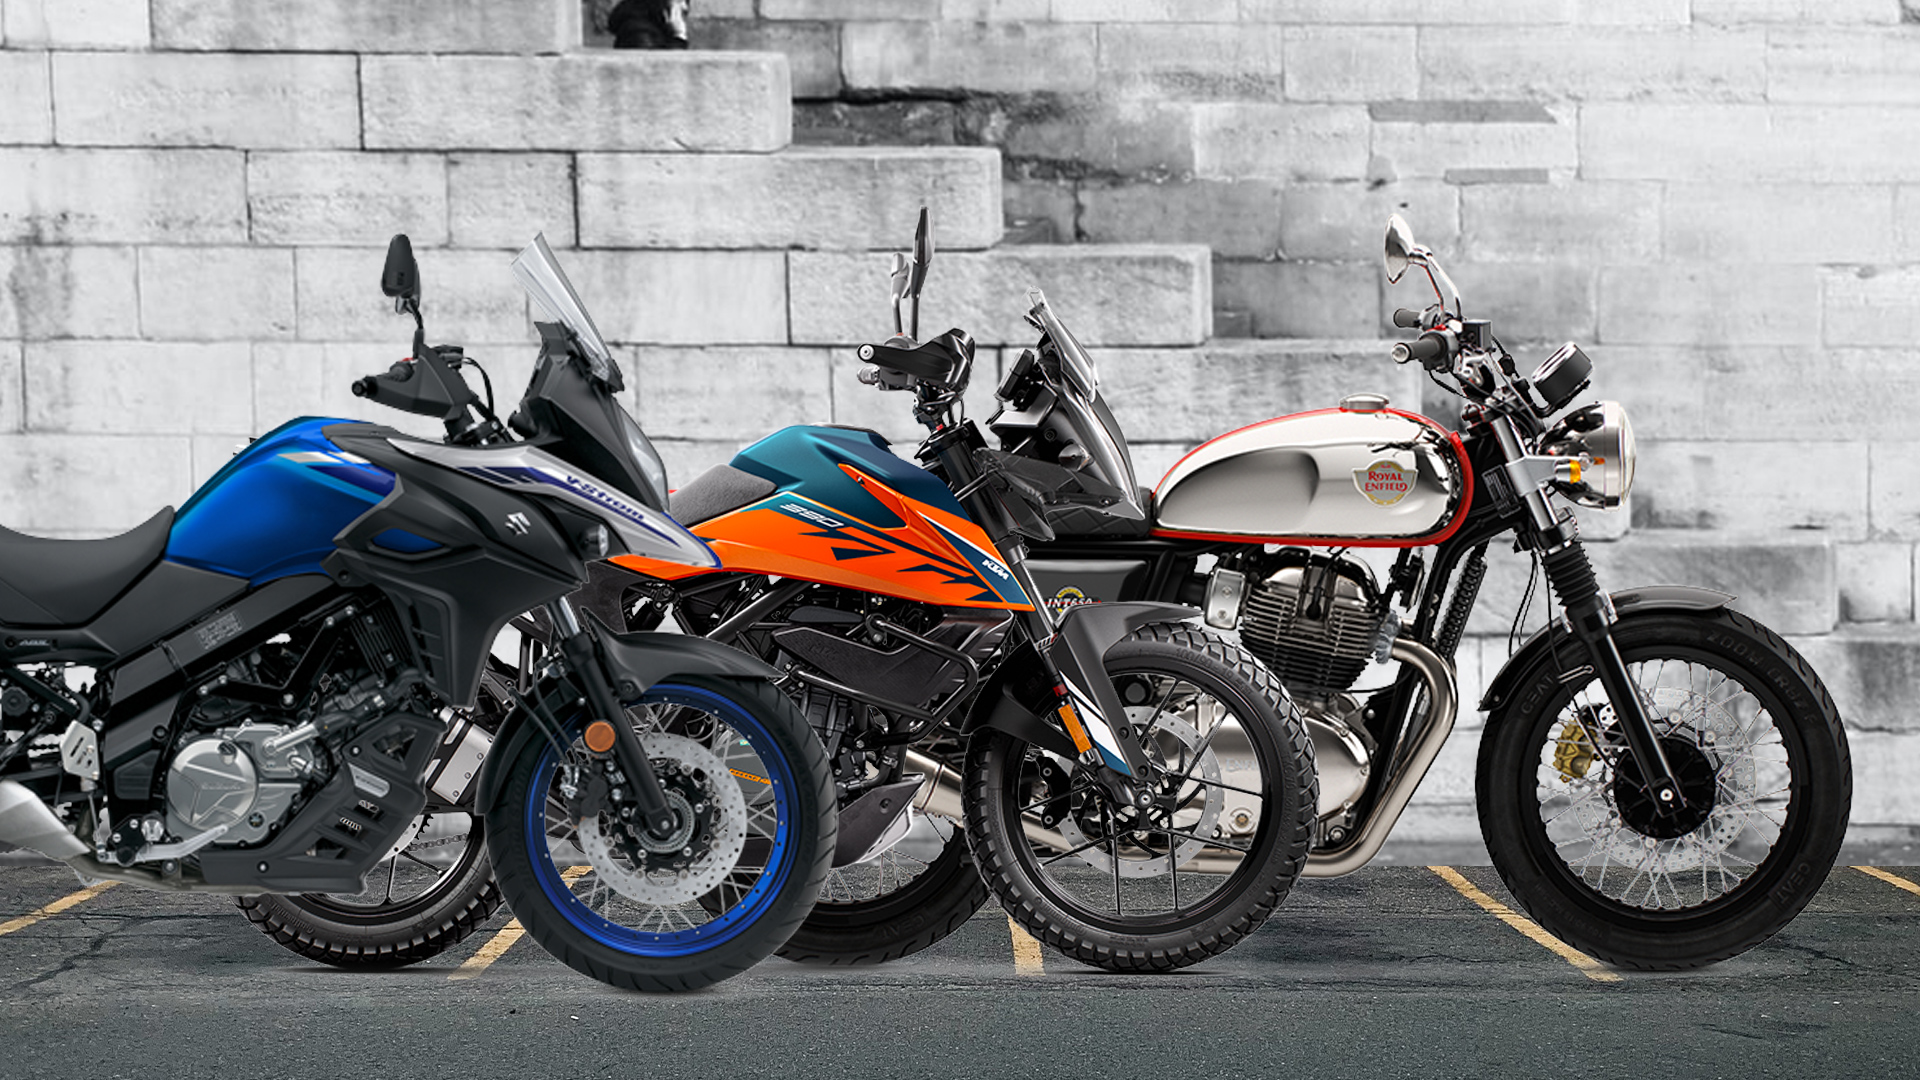 10 Motorcycles Awesome For Long Distance Riding